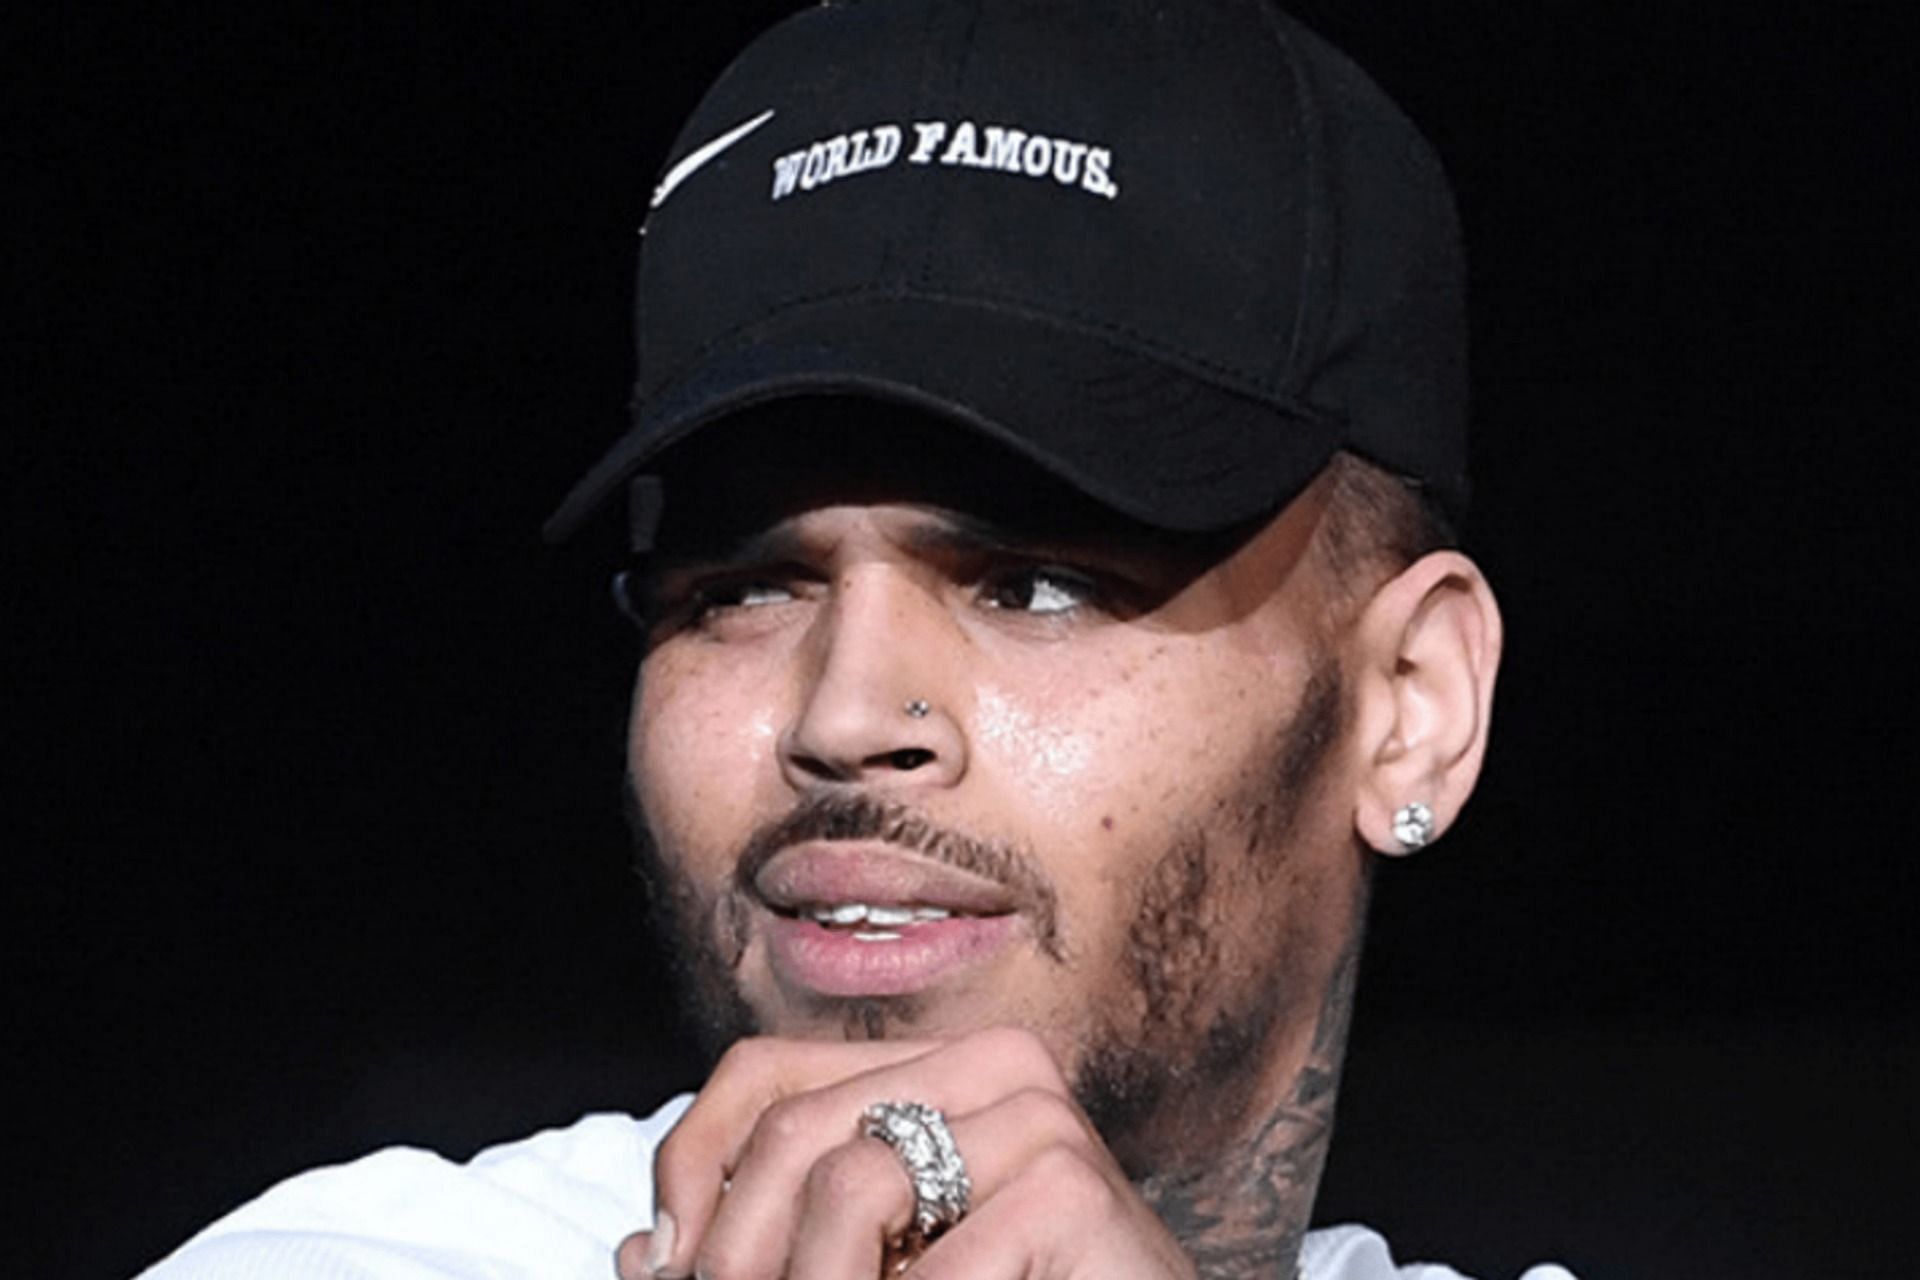 Text messages sent by Chris Brown and alleged victim go viral (Image via Paras Griffin/Getty Images)